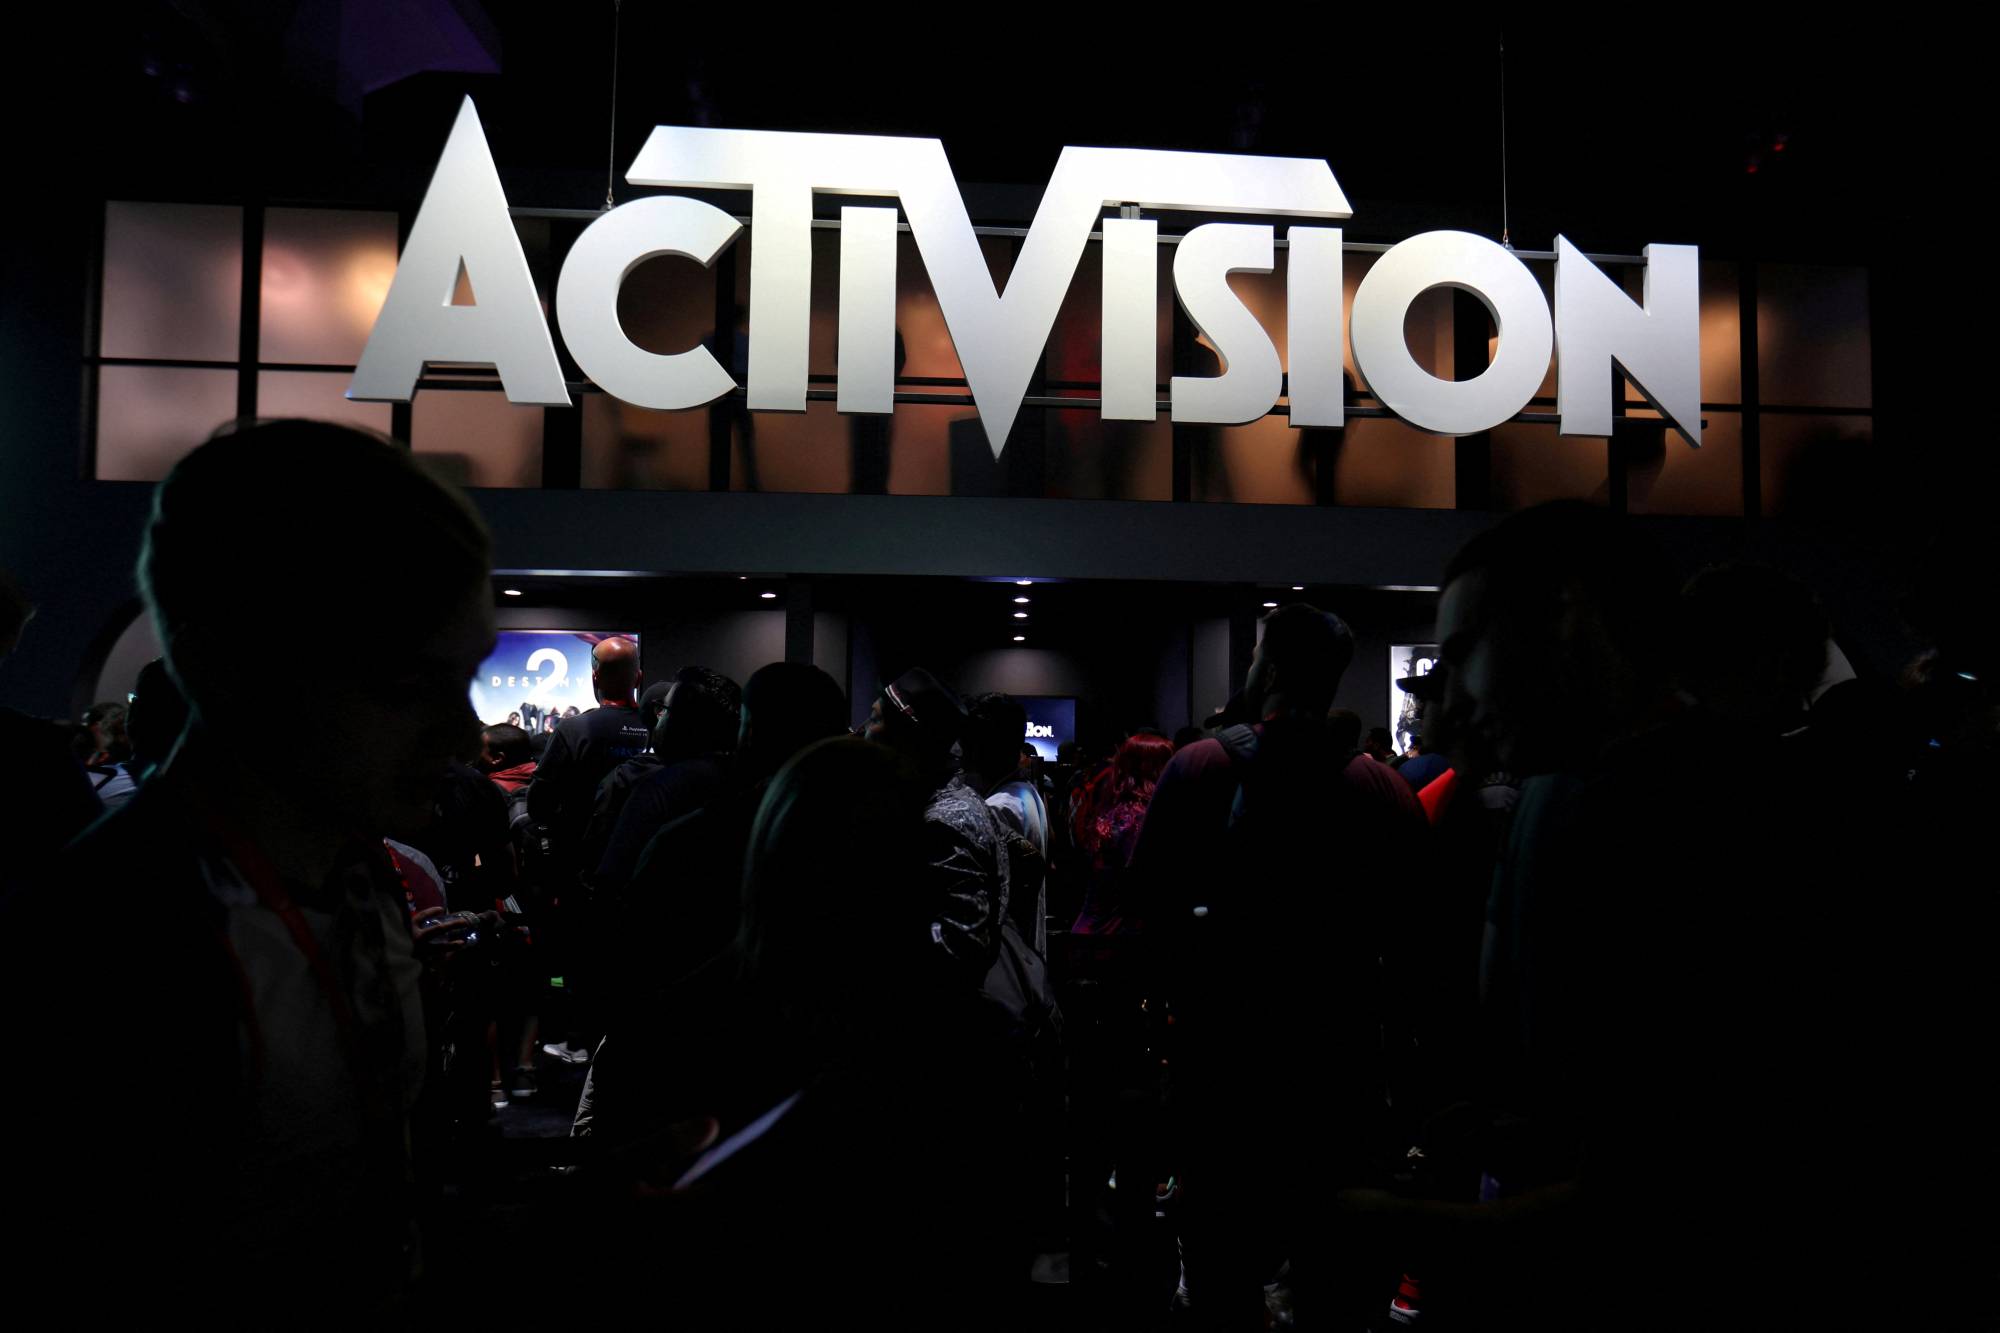 Every game and studio that will become part of Microsoft after the  Activision Blizzard deal - Meristation